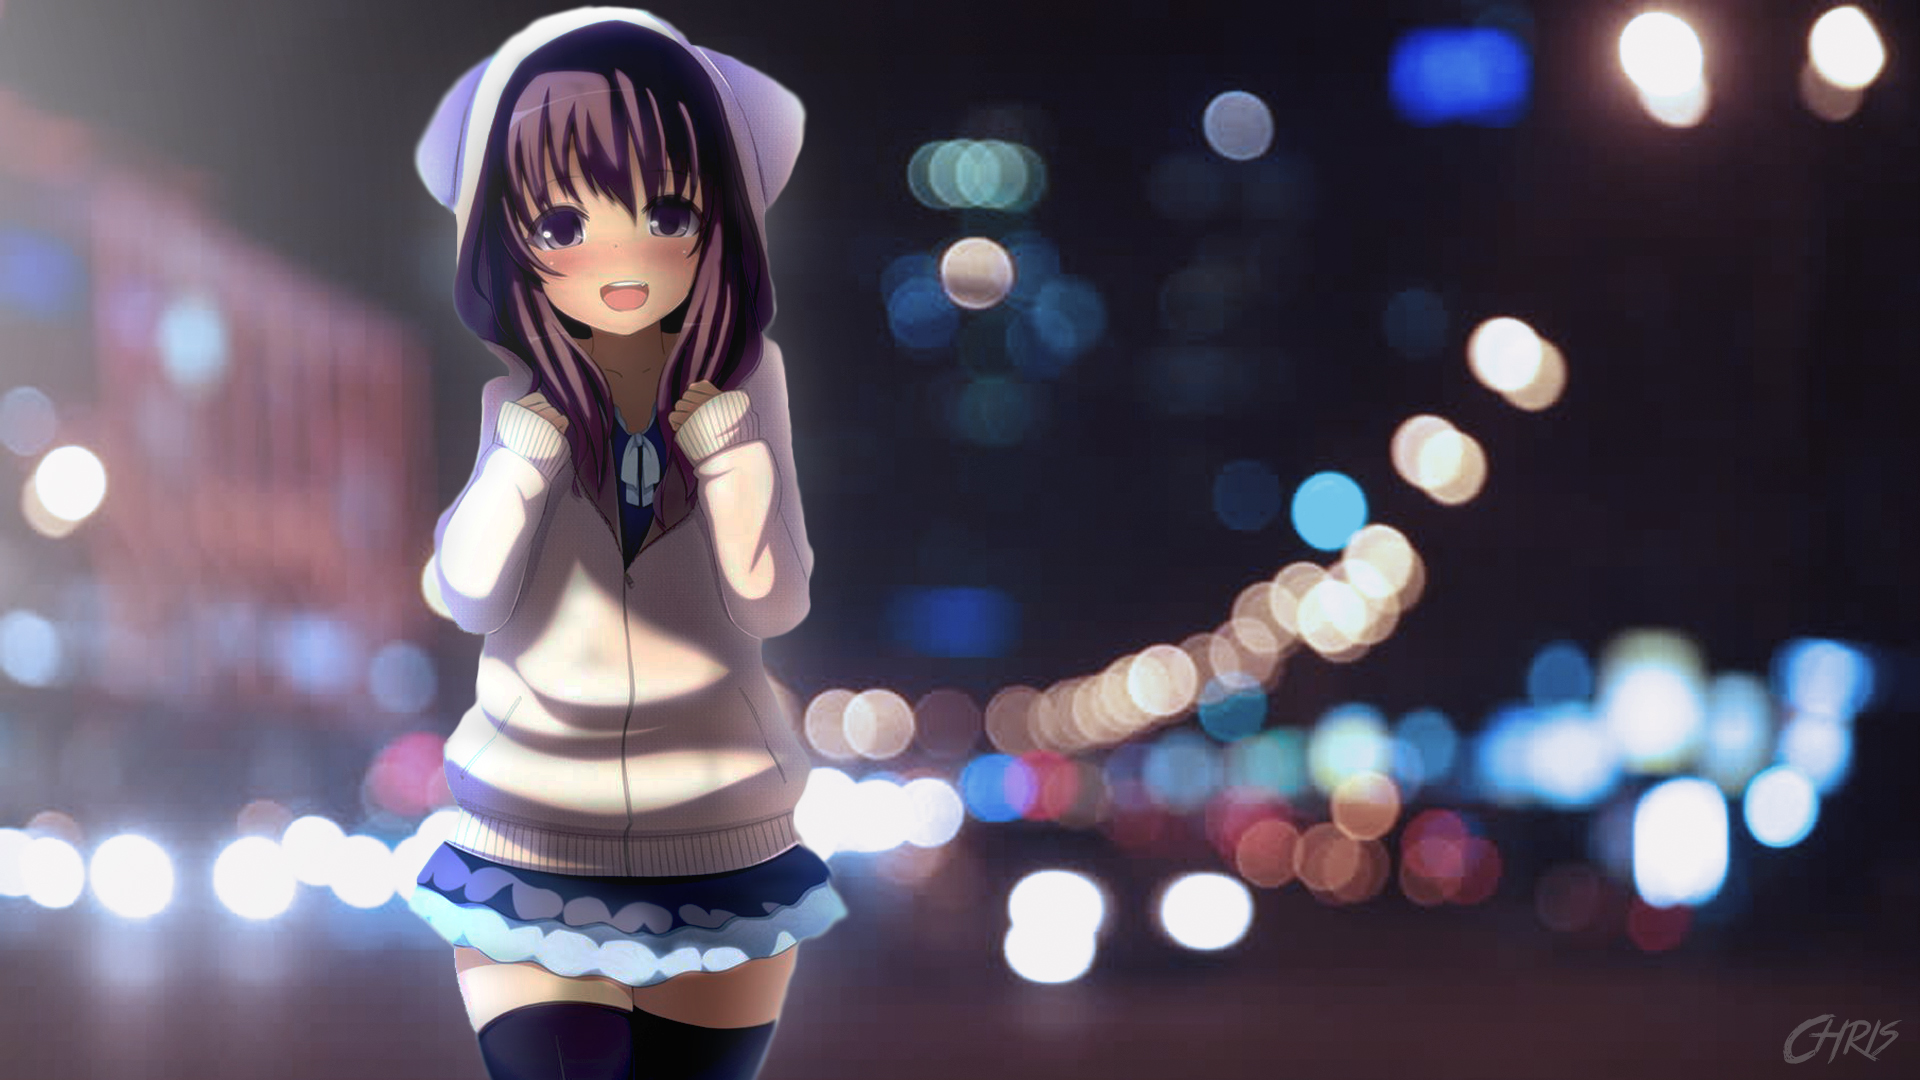 Anime in Real Life Wallpaper - in the city by KPPOnline on DeviantArt